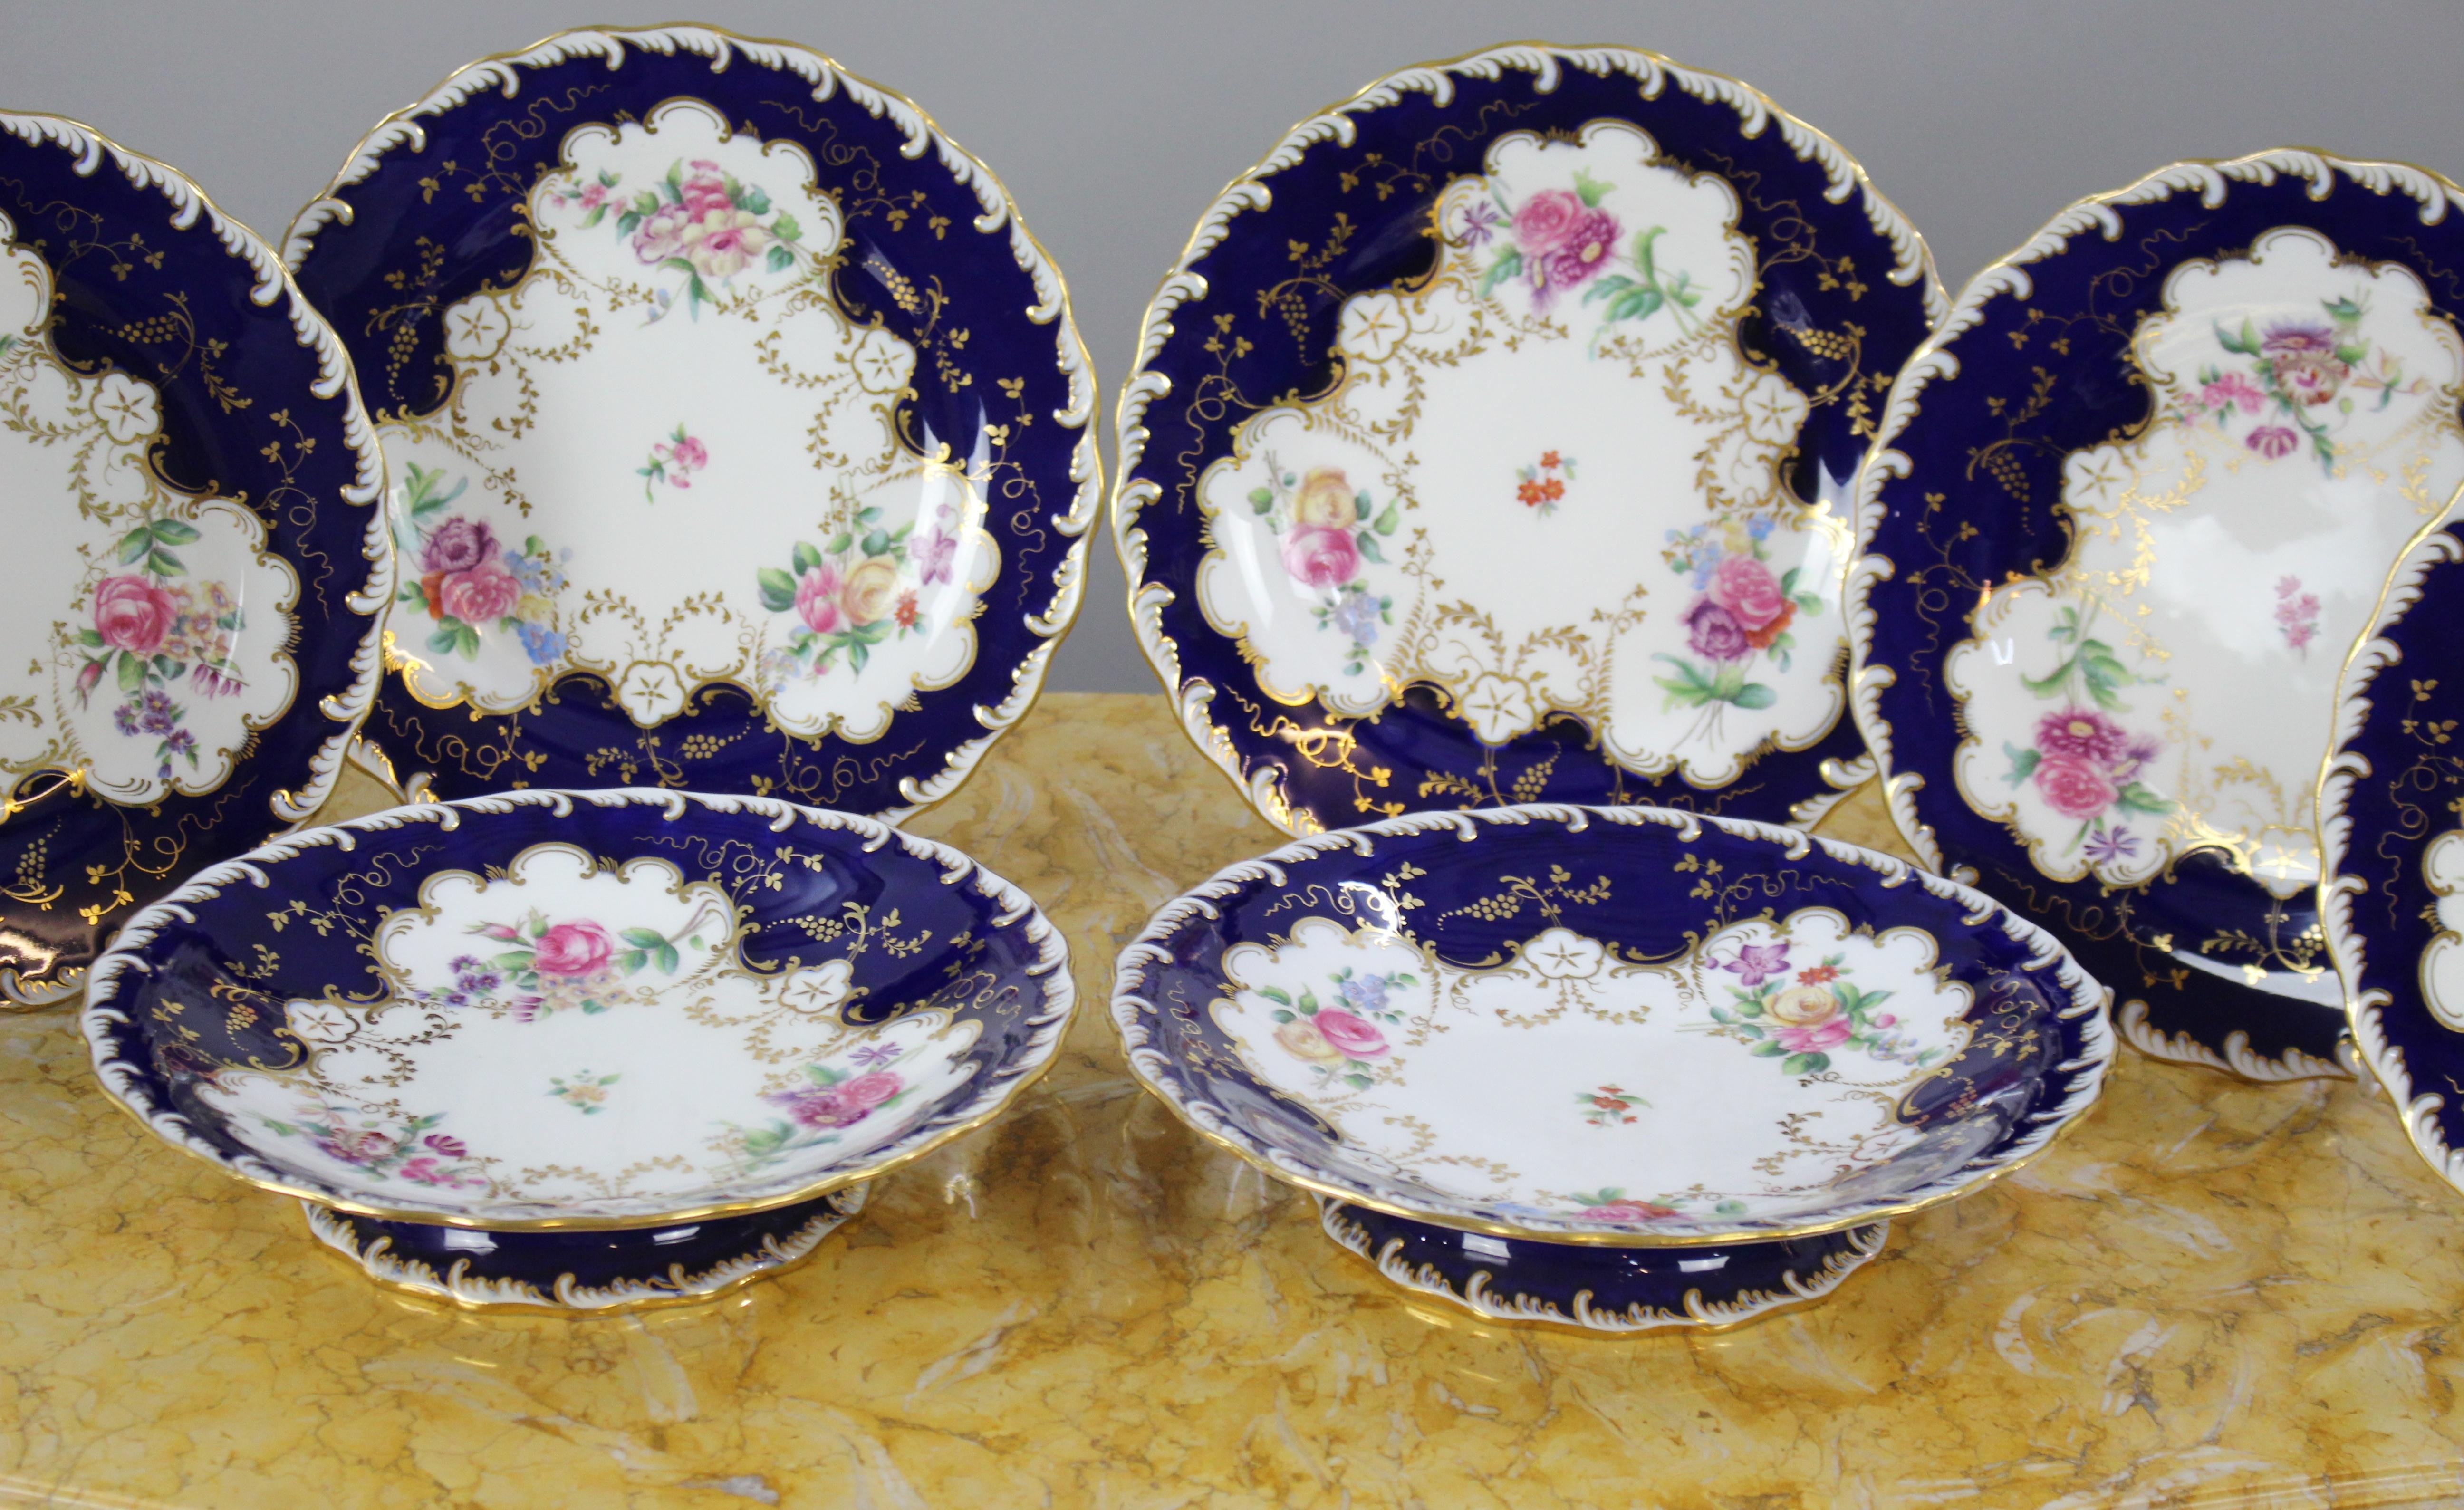 8 Piece Minton Floral Cobalt Dessert Service, circa 1900 In Good Condition For Sale In Worcester, Worcestershire